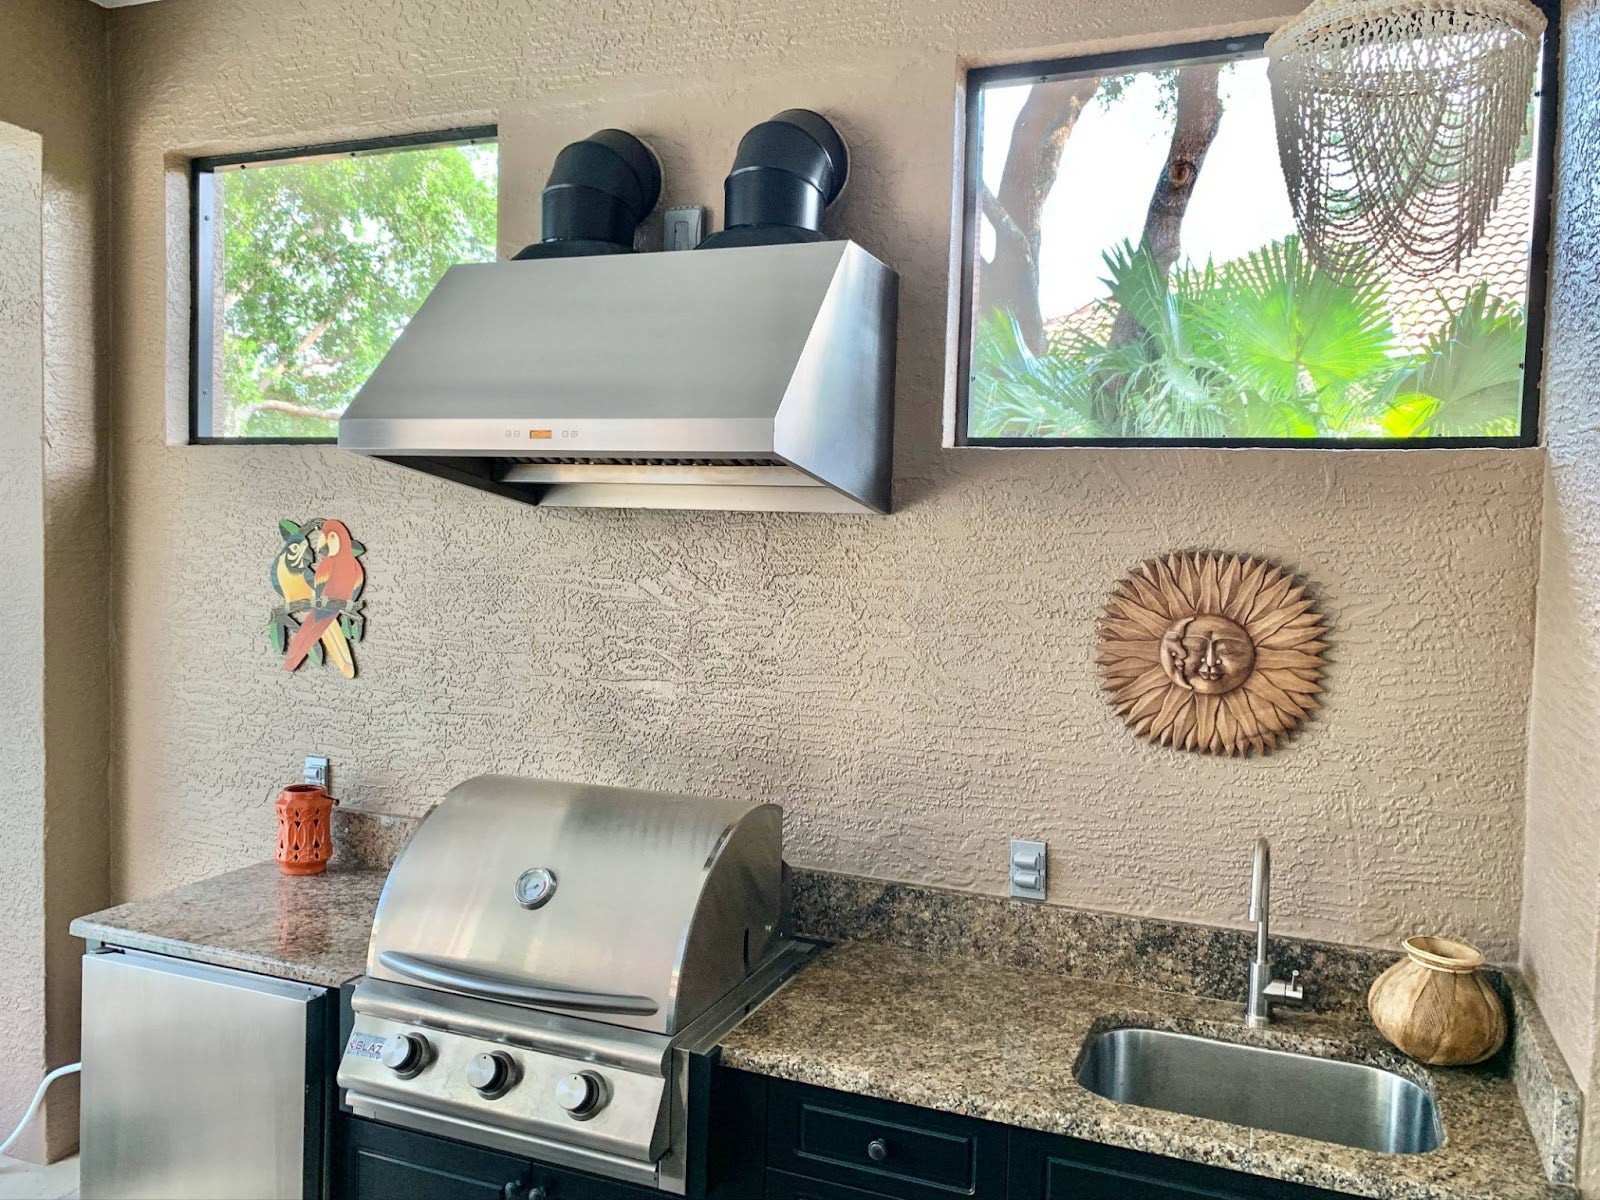 Cheerful outdoor grilling station with a Proline range hood, complete with a parrot wall ornament and sun face sculpture, creating a fun cooking space - prolinerangehoods.com.